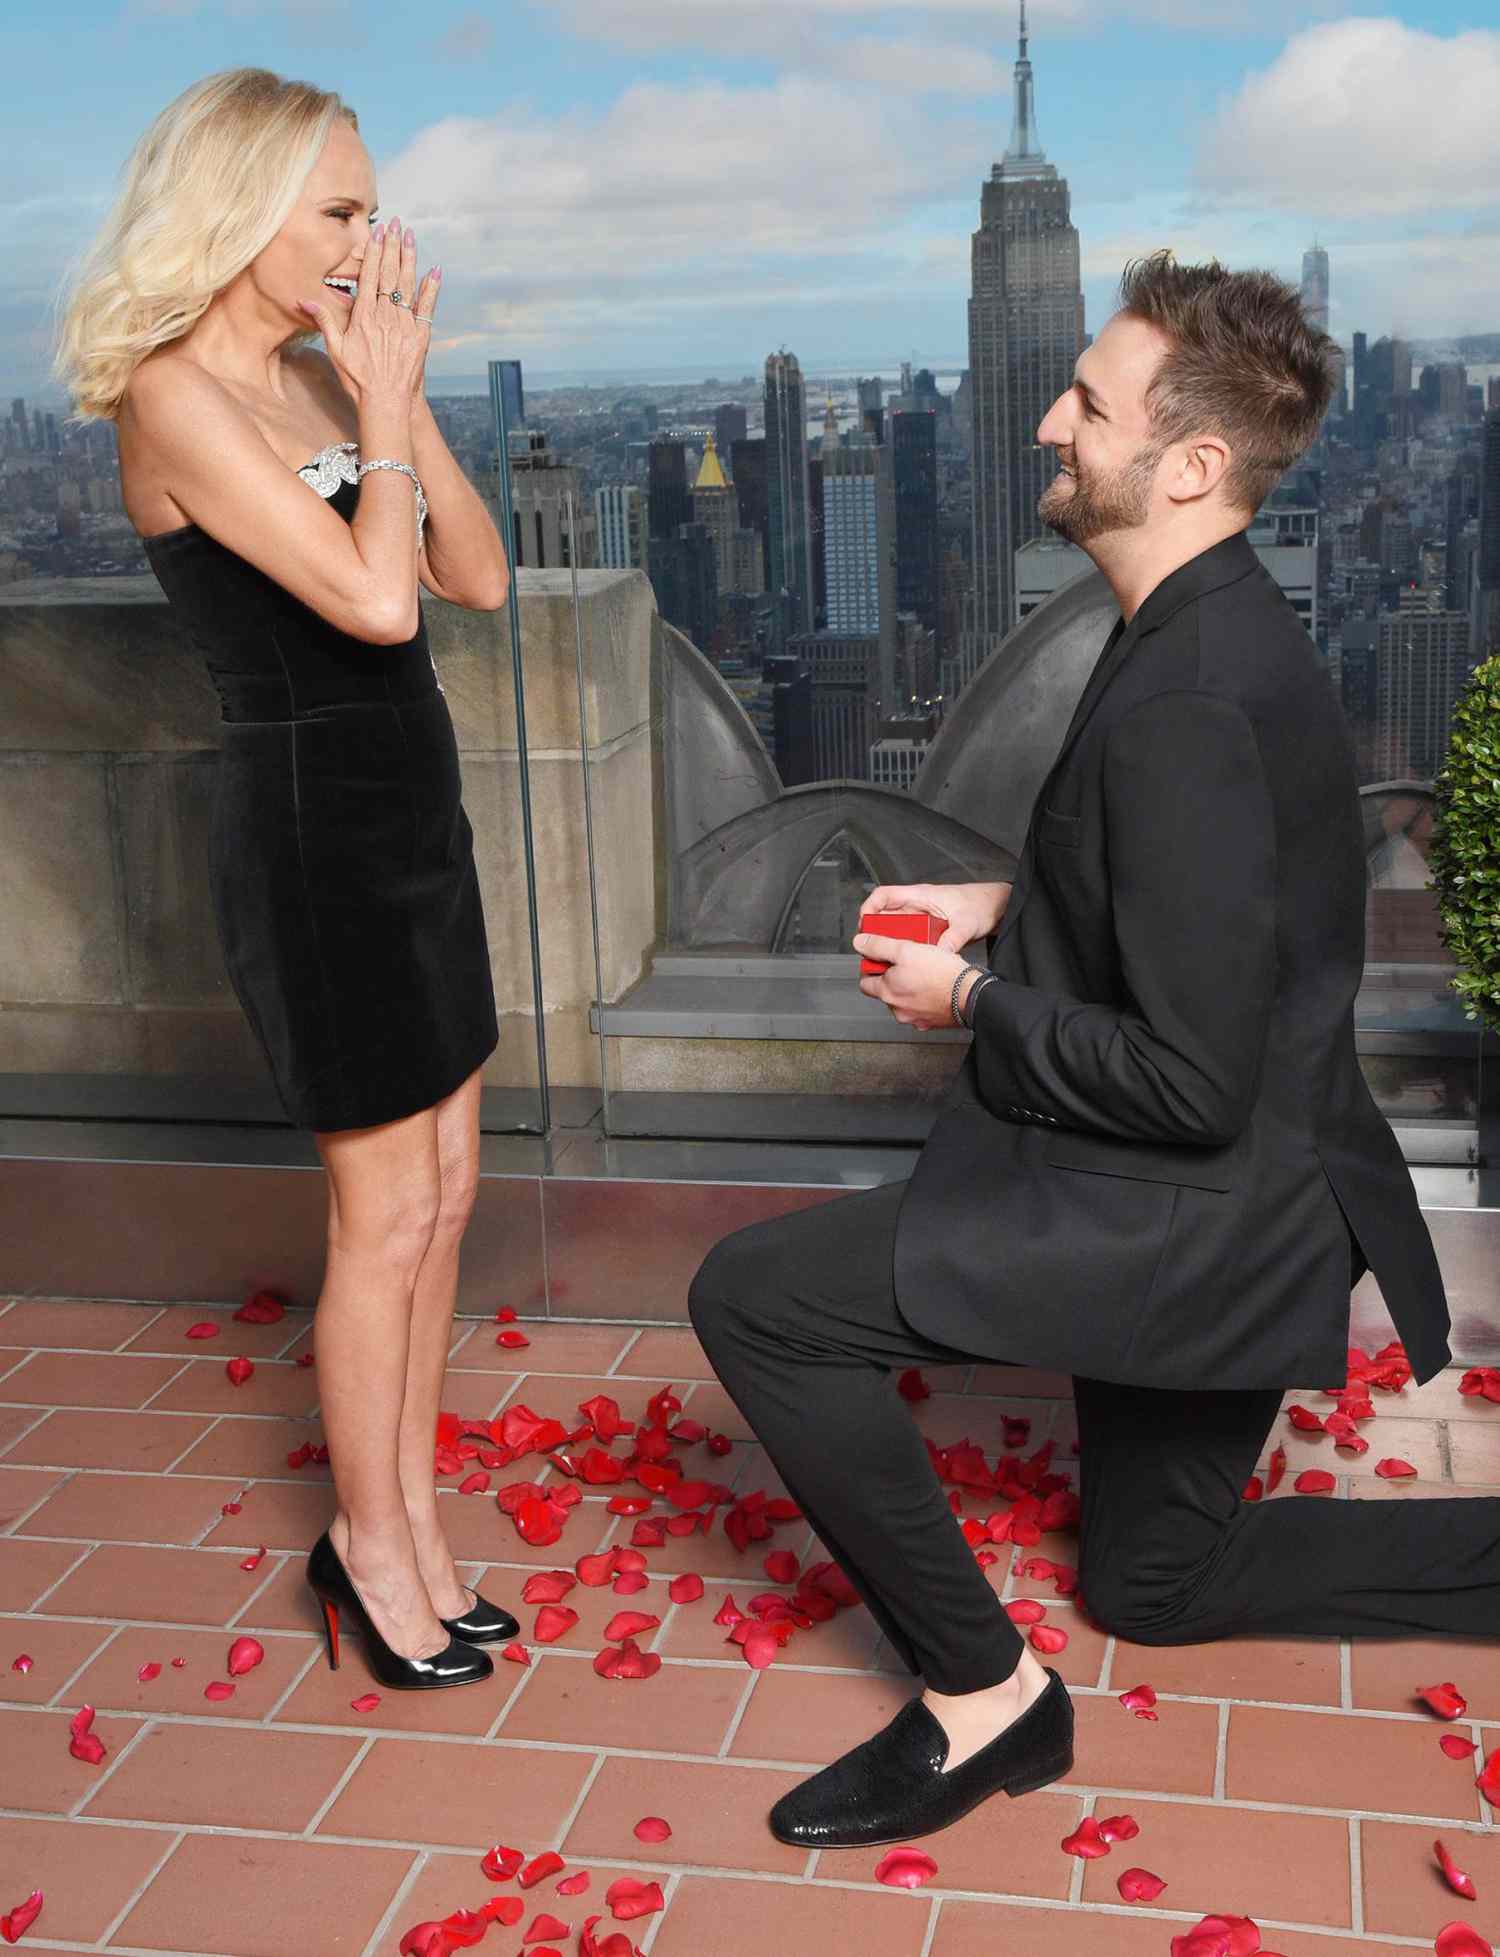 Kristin Chenoweth Gets Engaged at The Rainbow Room Followed by Dinner at Fresco By Scotto